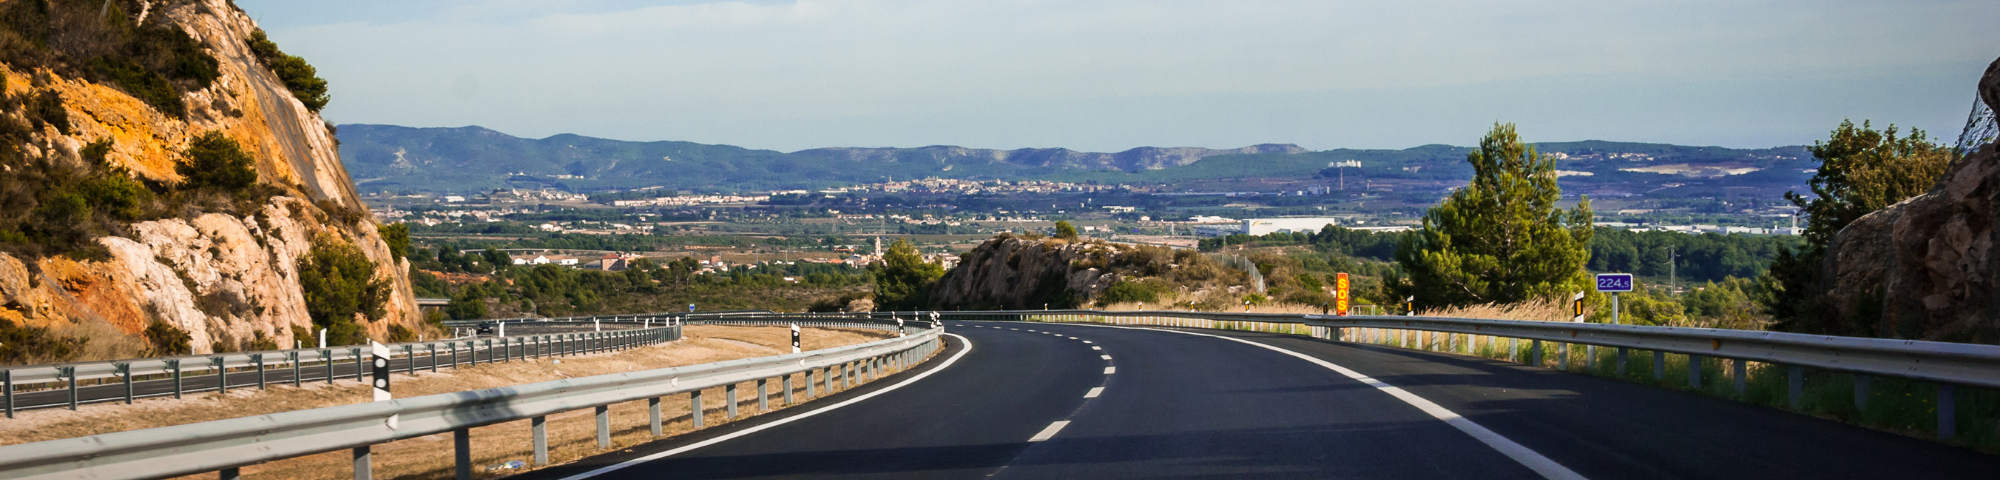 Image of a road heading to Barcelona